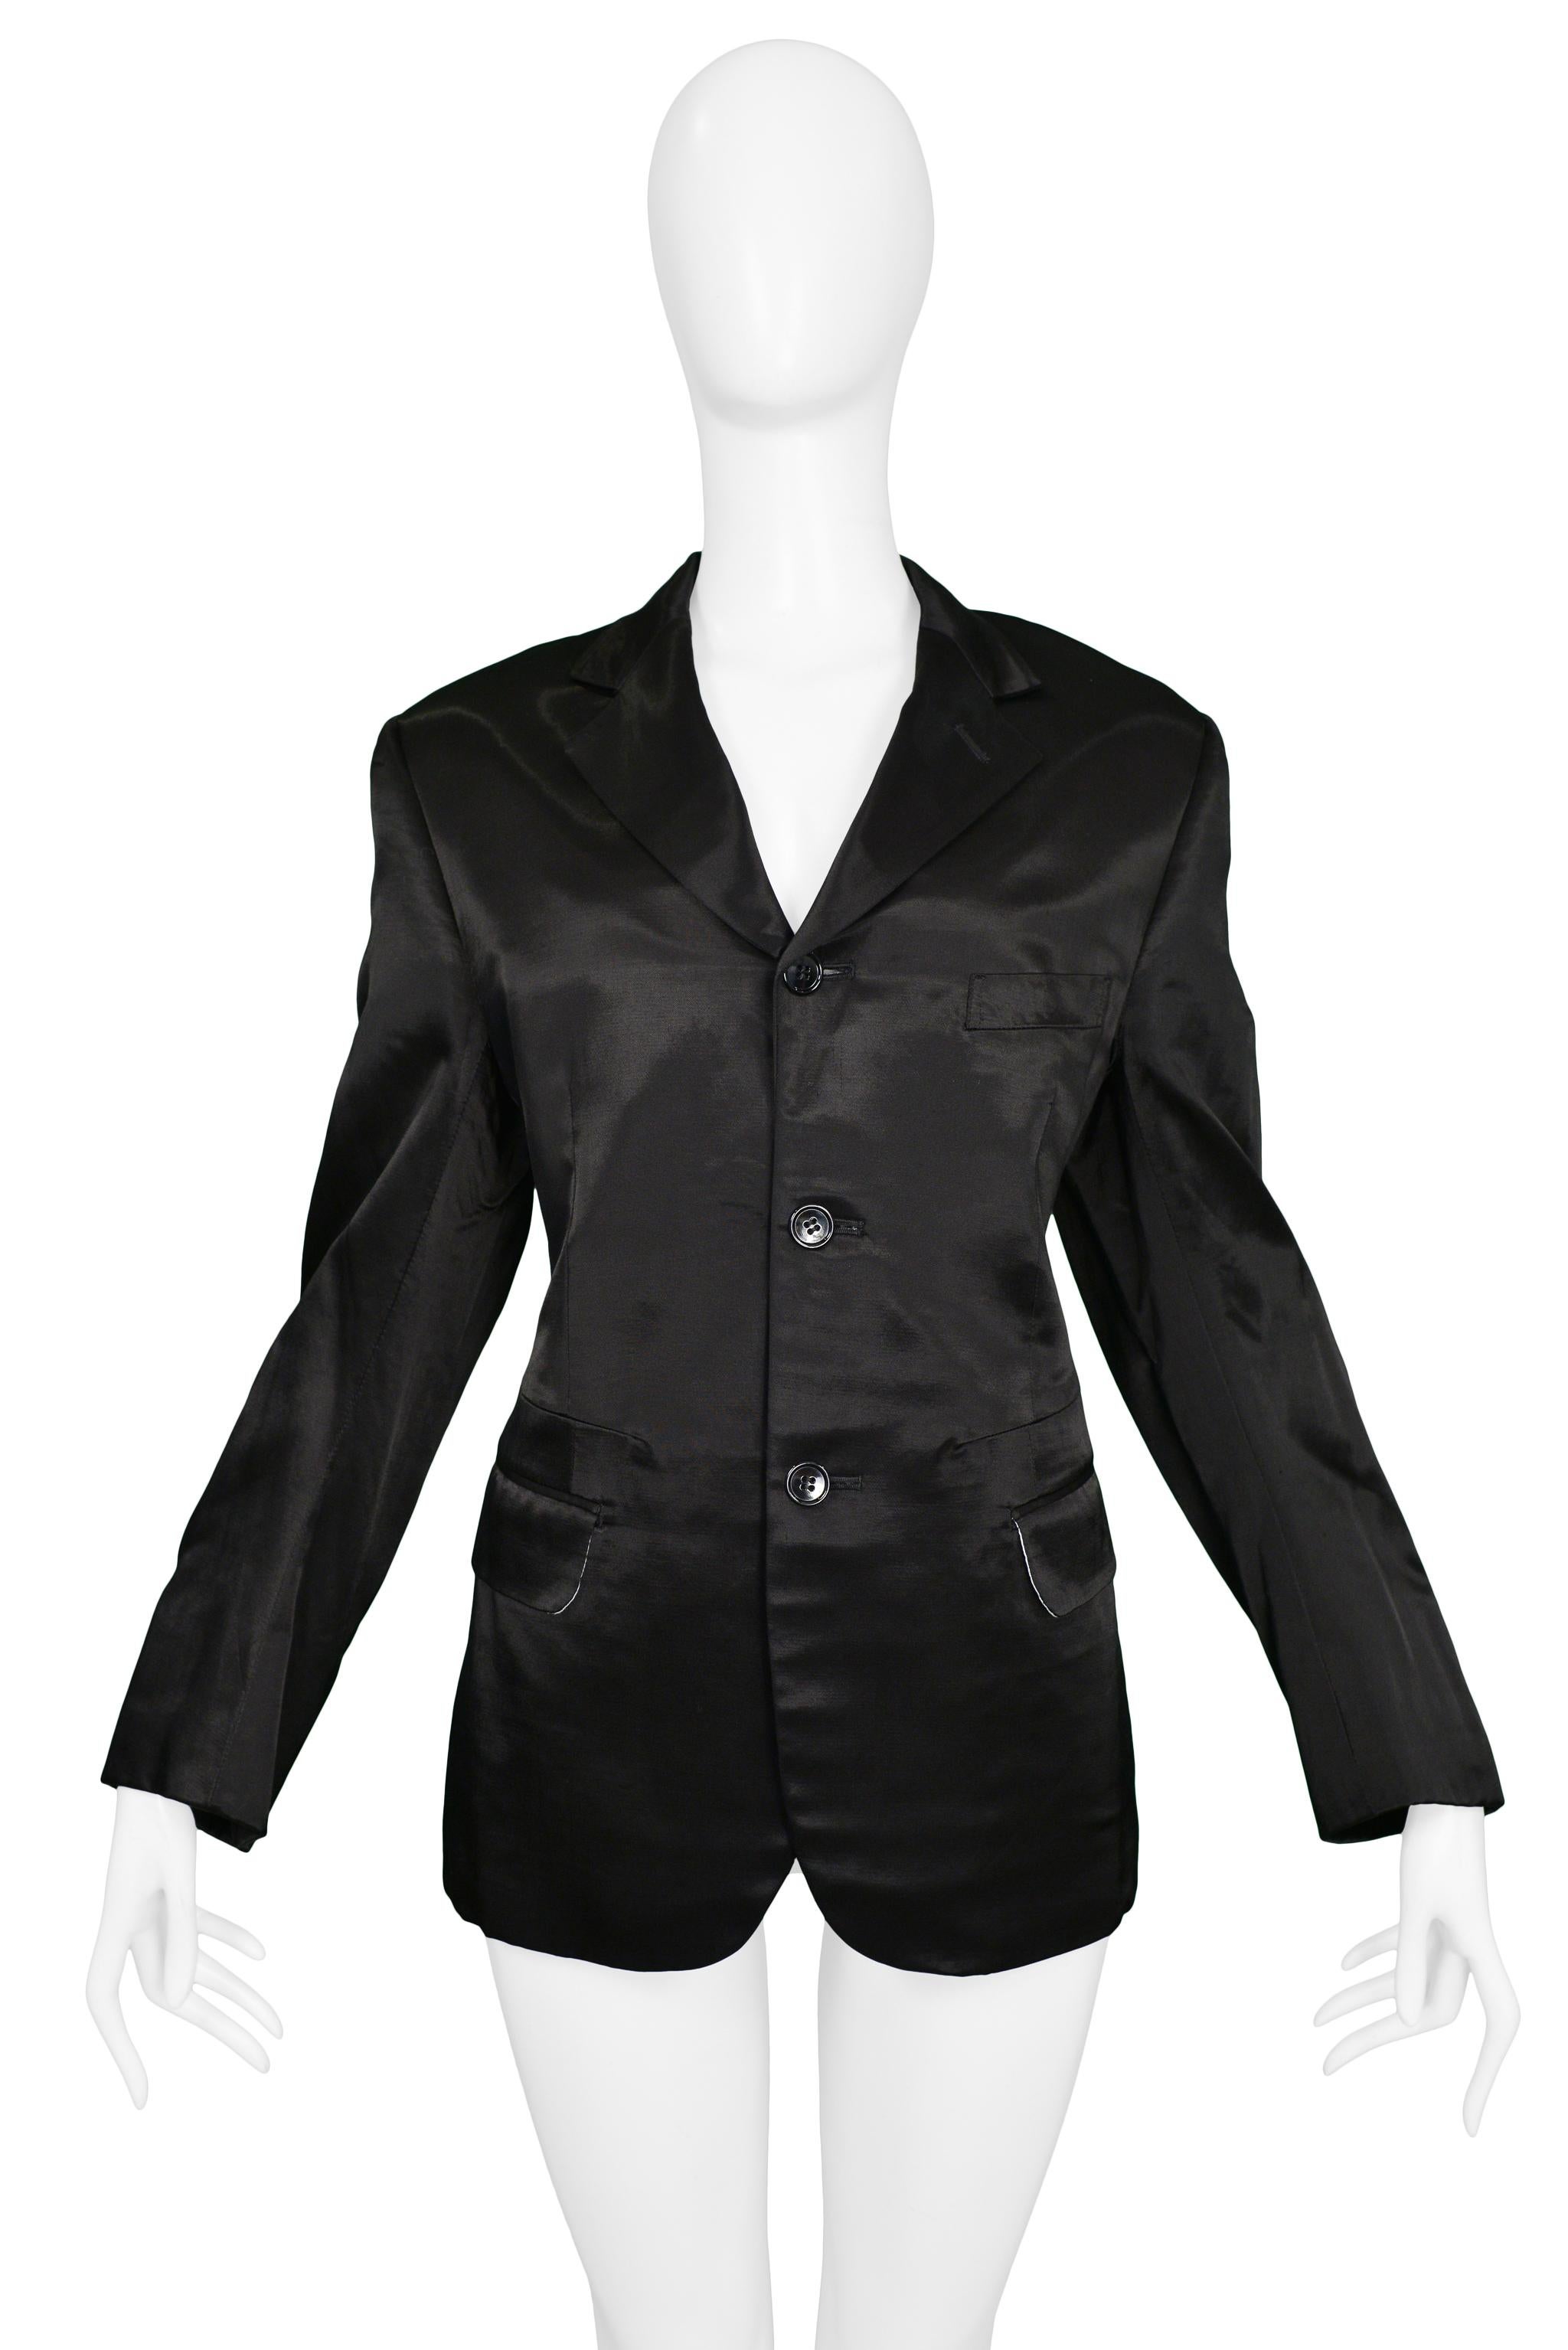 Resurrection Vintage is excited to offer a vintage Comme des Garcons black satin blazer with a three-button front enclosure, side pockets, and hip length.

Comme Des Garcons
Size: Small
Fabric: Satin
Very Good Vintage Condition 
Authenticity